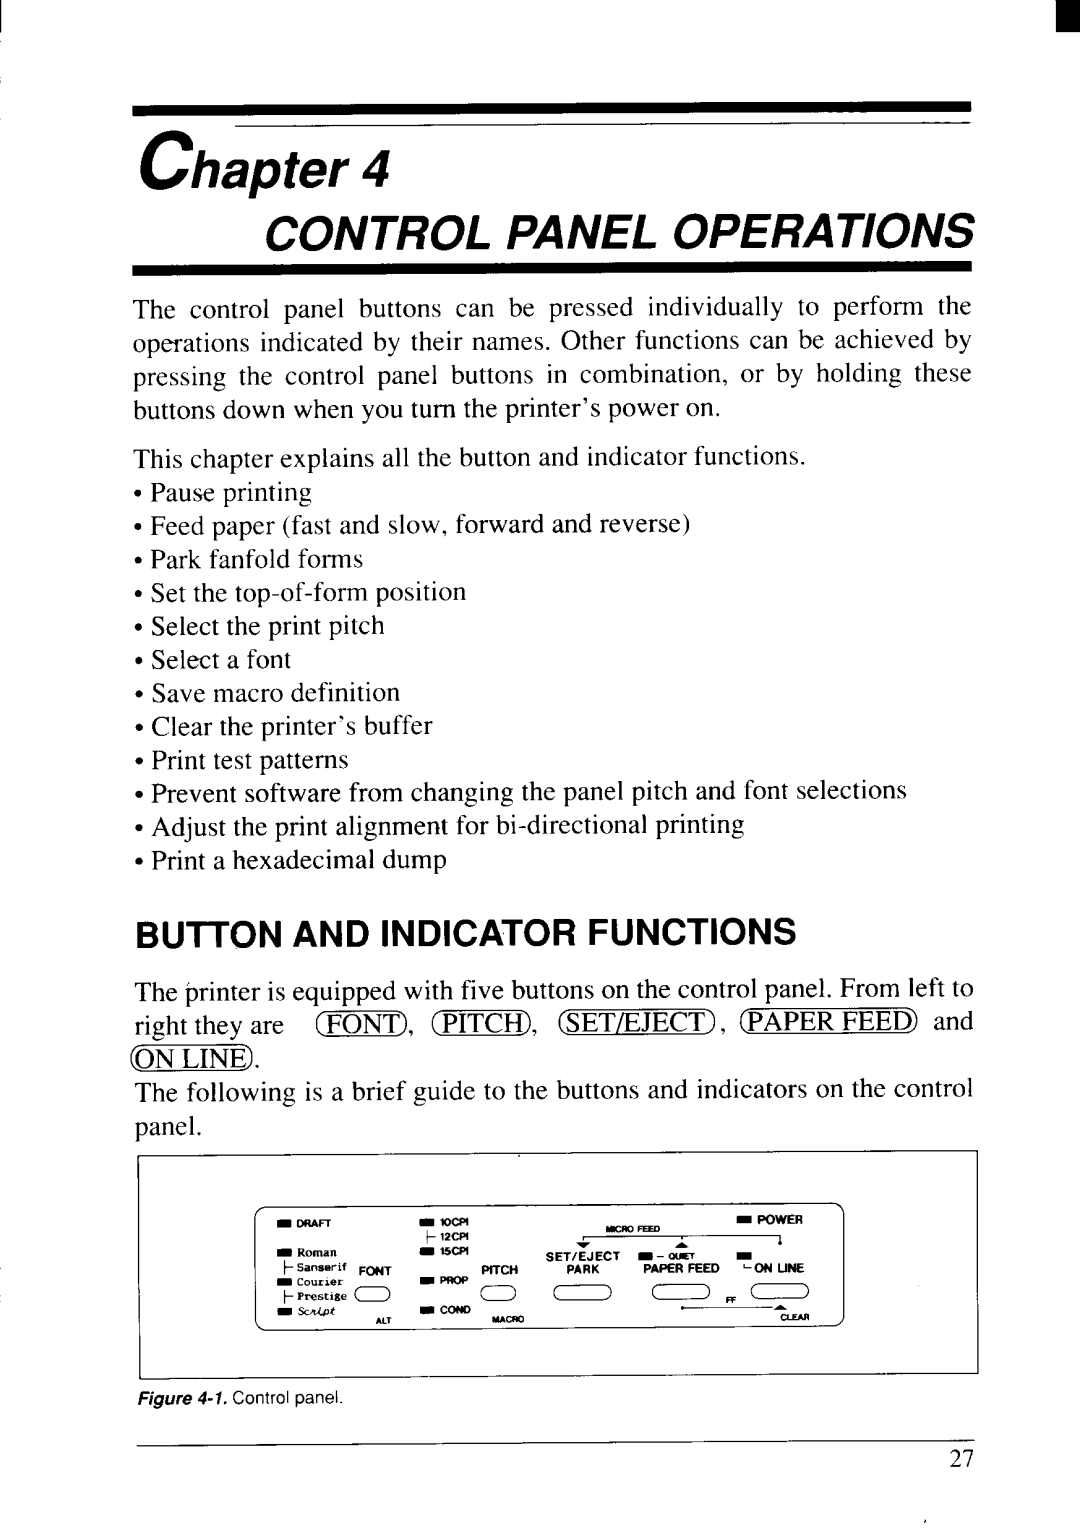 Star Micronics NX-2415II user manual Control Panel Operations, Buiton And Indicator Functions, chapter 